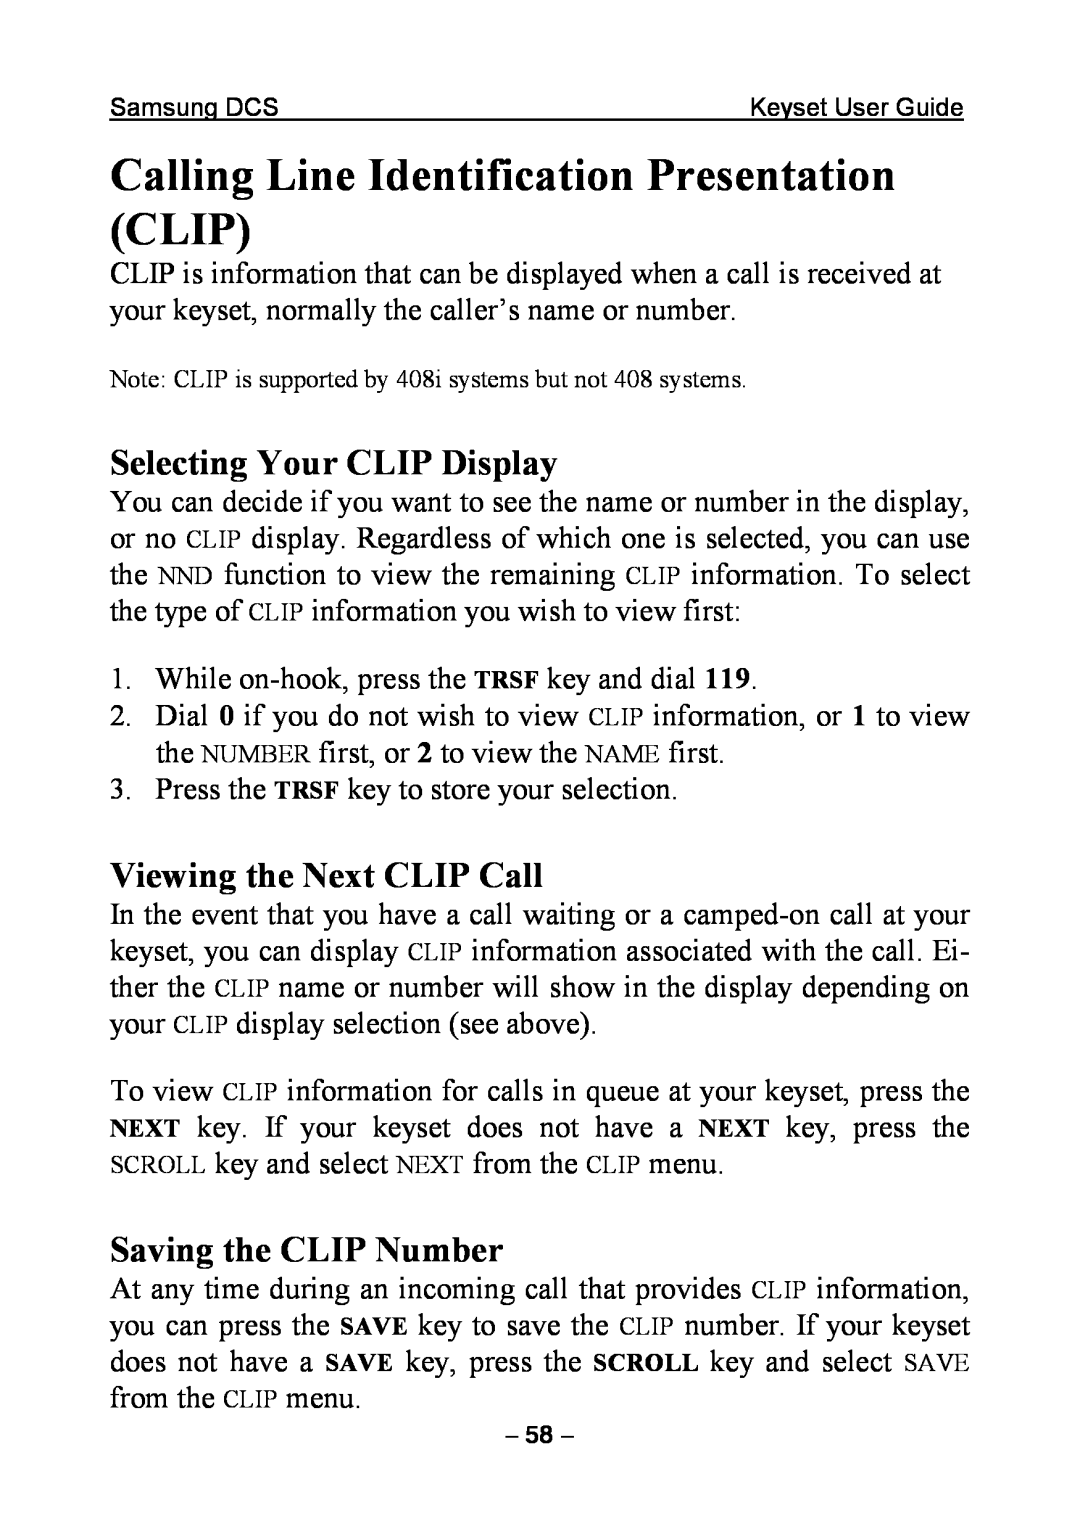 Samsung DCS KEYSET Calling Line Identification Presentation CLIP, Selecting Your CLIP Display, Viewing the Next CLIP Call 